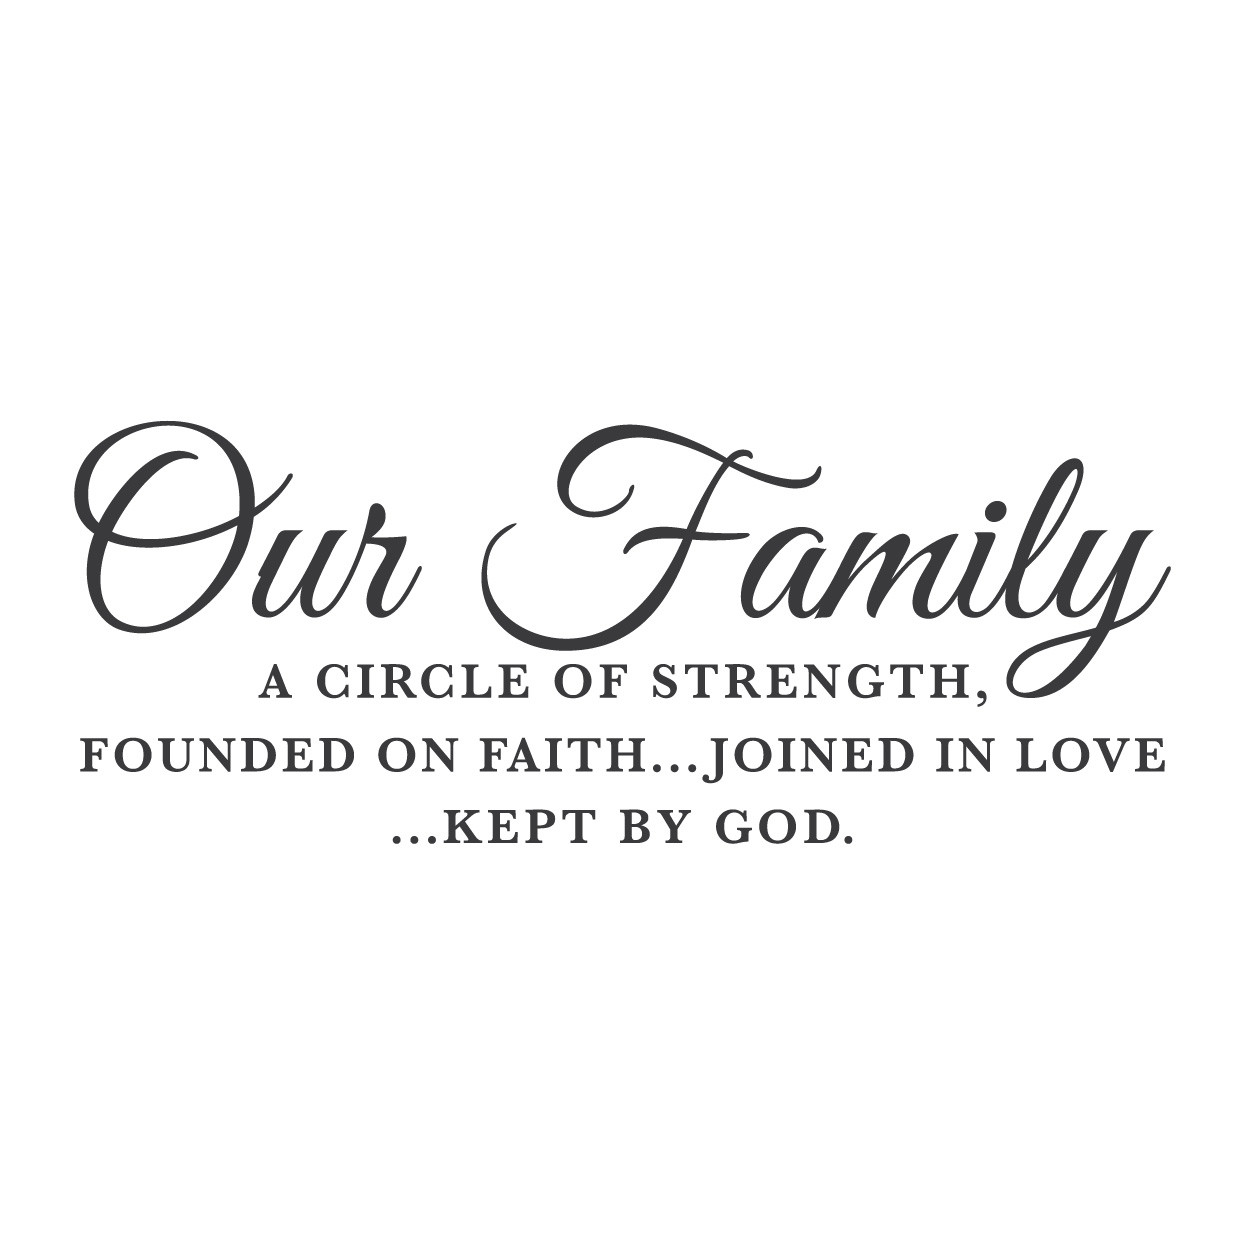 Our family is a circle of strength; founded on faith, joined by love Kept by God